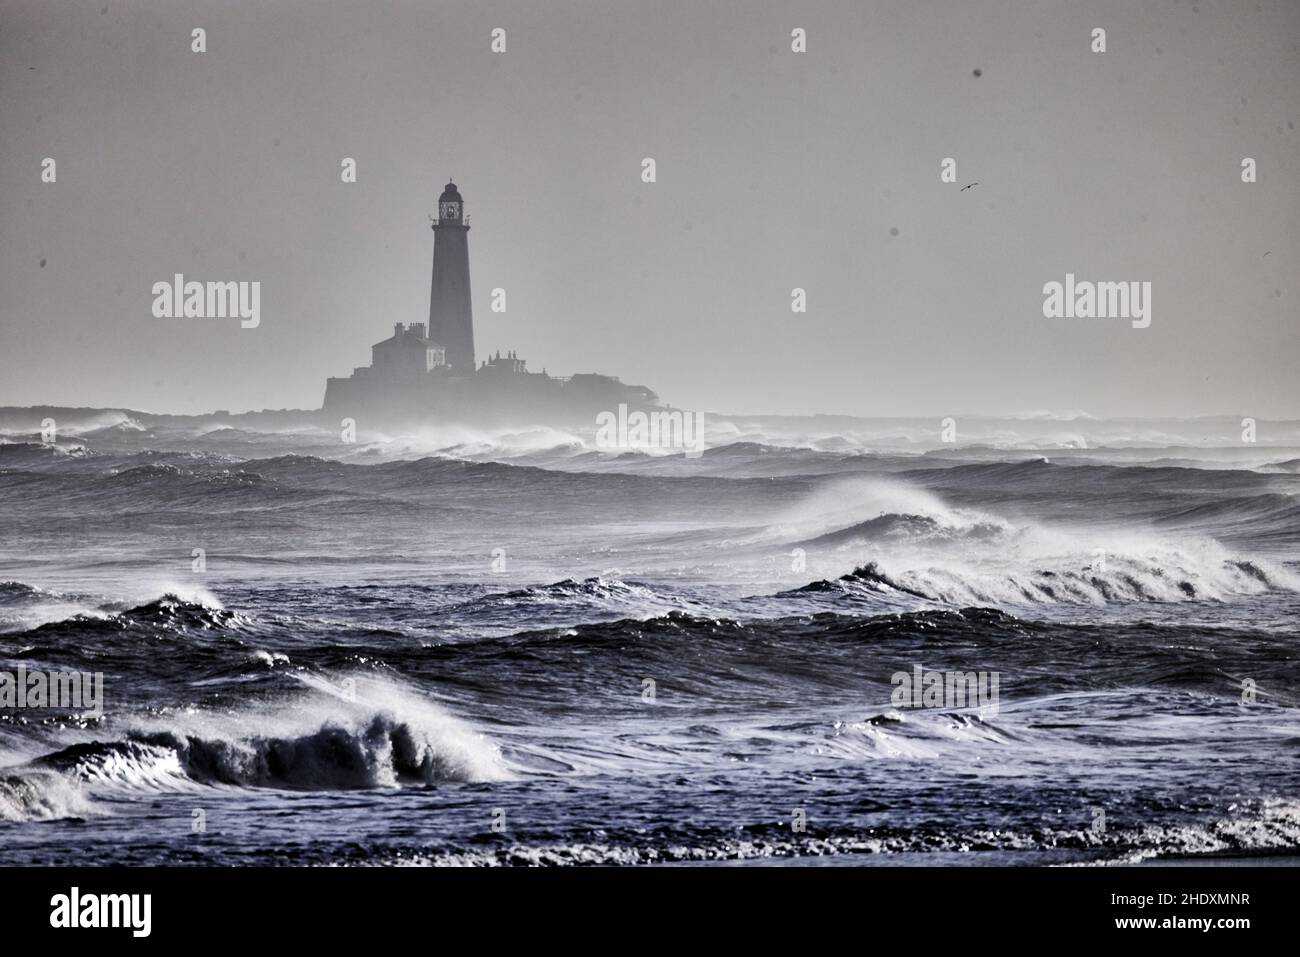 St. Mary's Lighthouse Whitley Bay, a seaside town in North Tyneside, Tyne & Wear, England taken from Blyth Stock Photo